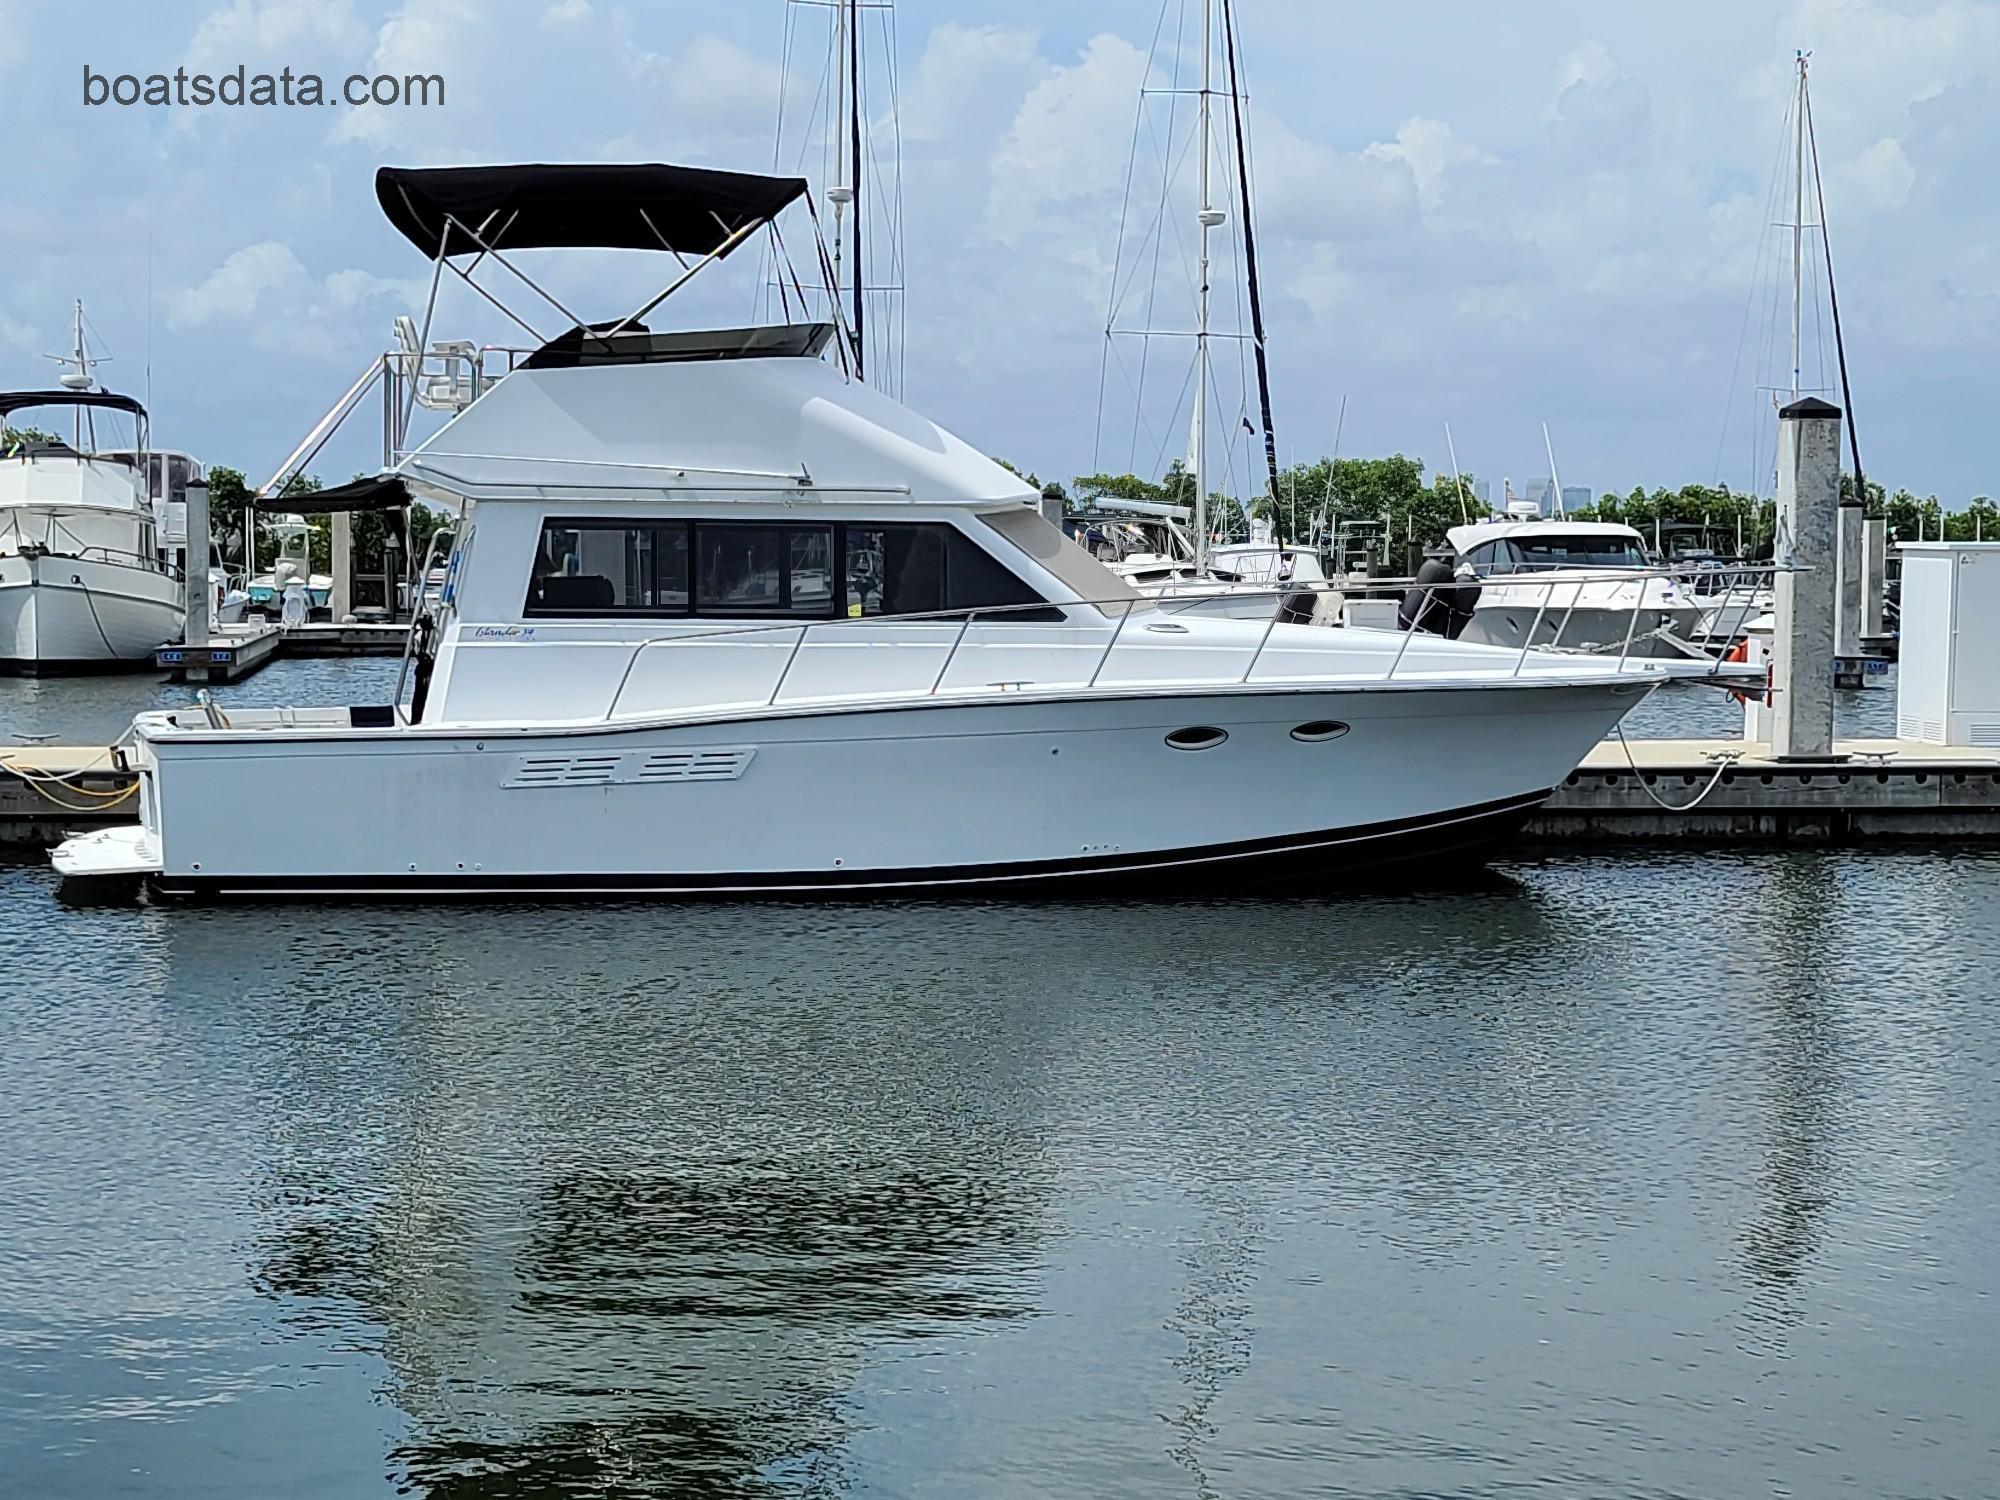 Catalina Islander 34 tv detailed specifications and features